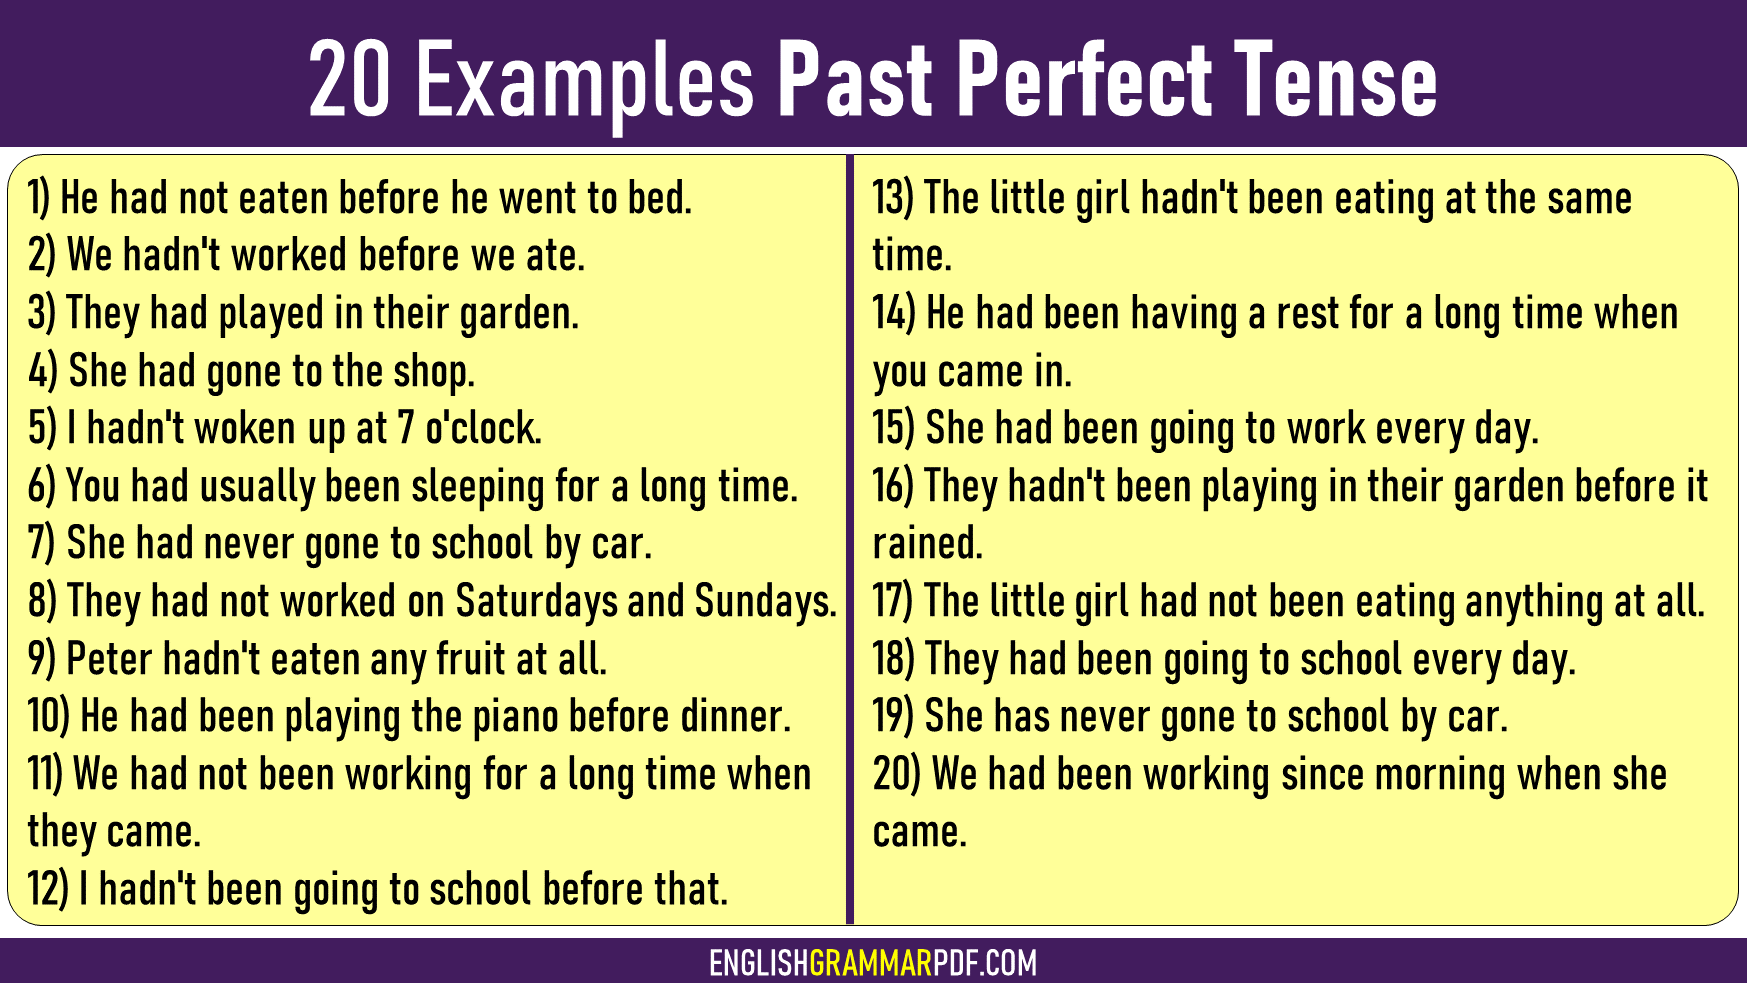 Write 5 Examples Of Past Perfect Tense